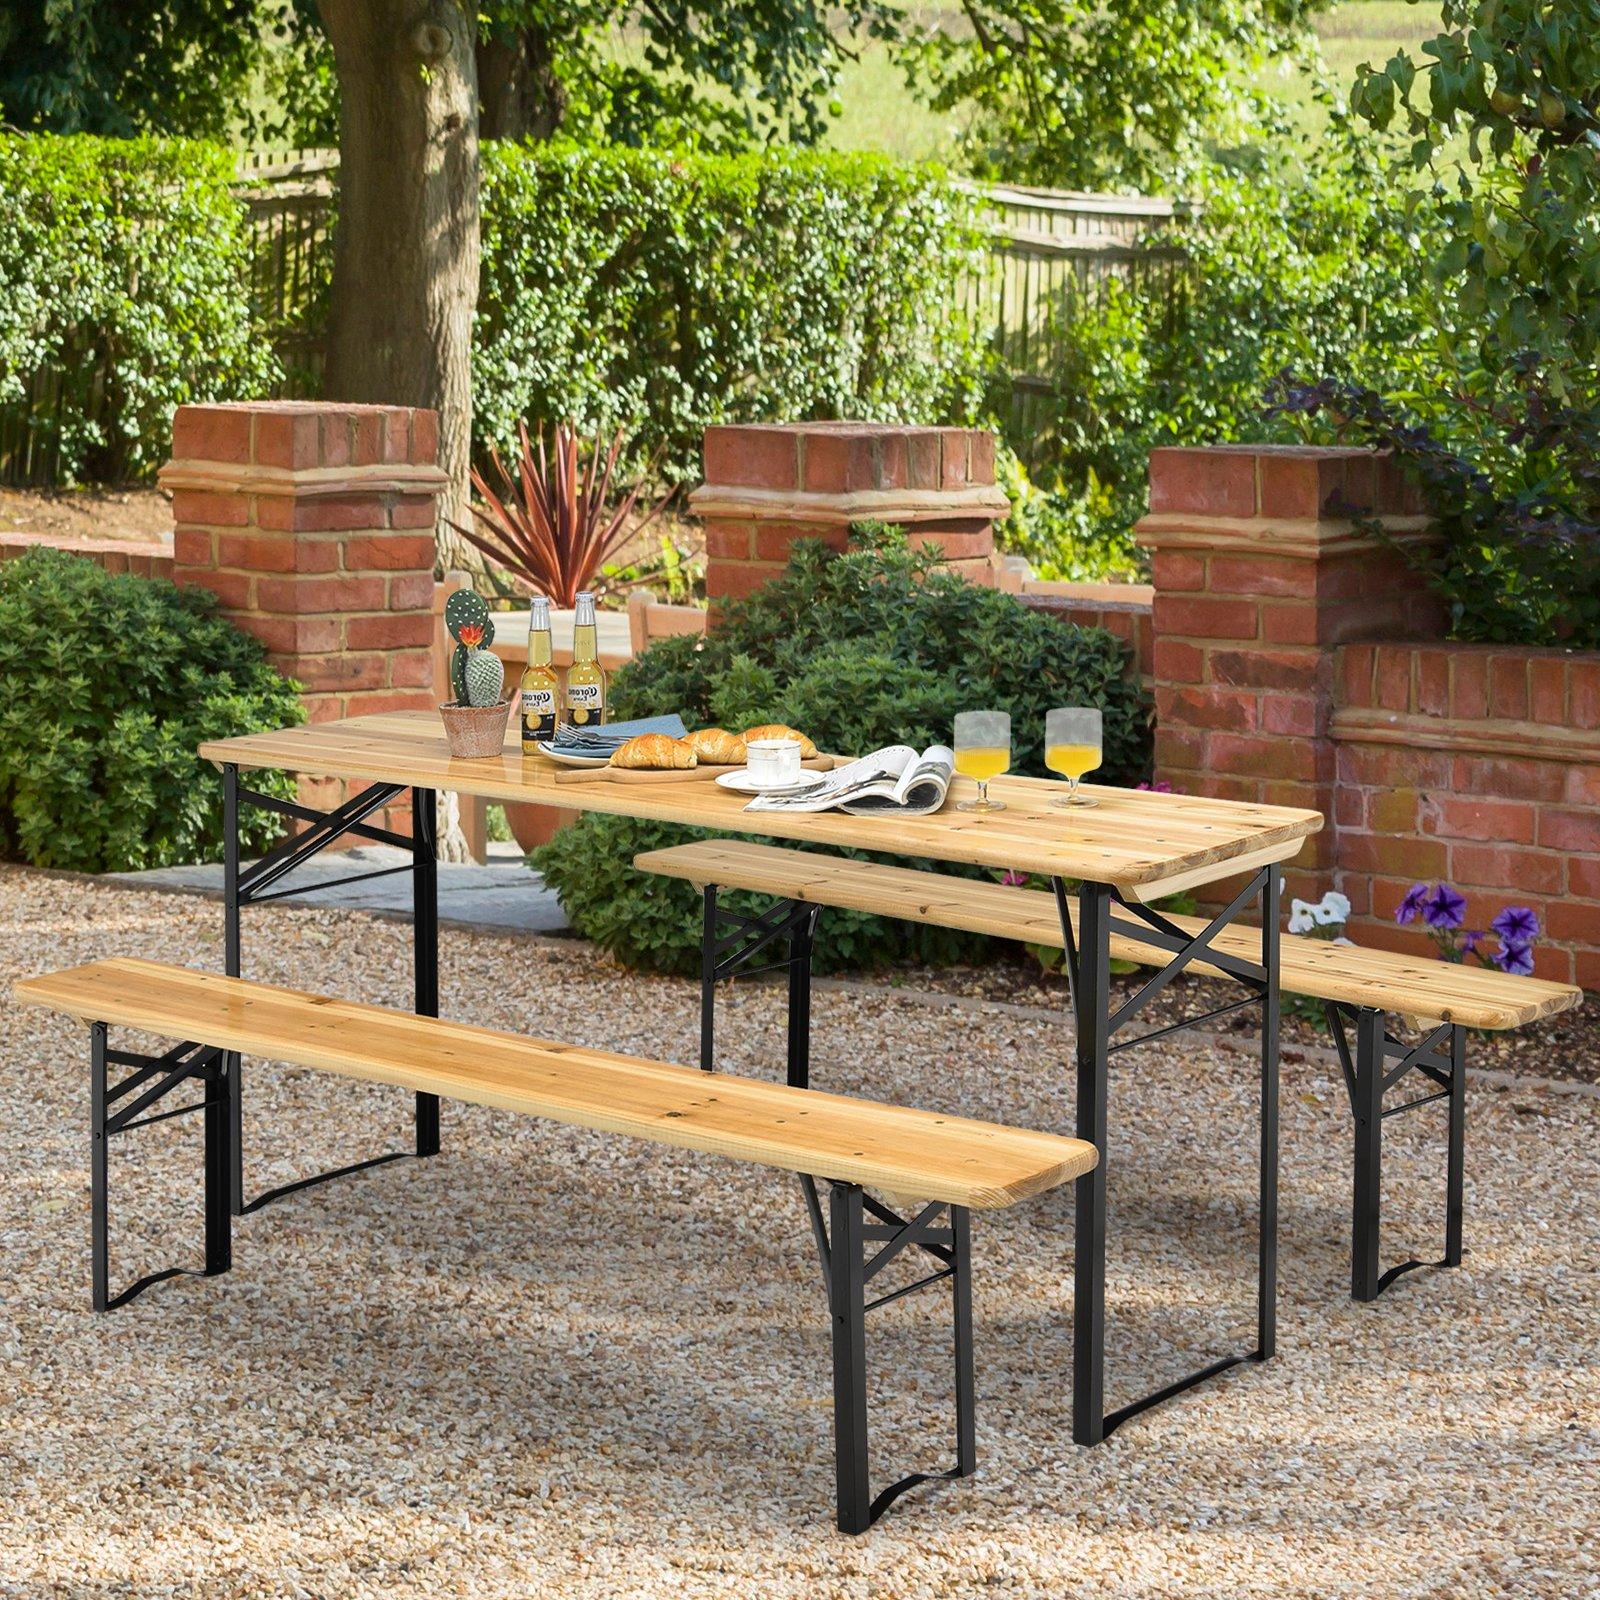 3-Piece Folding Picnic Table and Bench Set Wooden Dinning Table with Seat Set